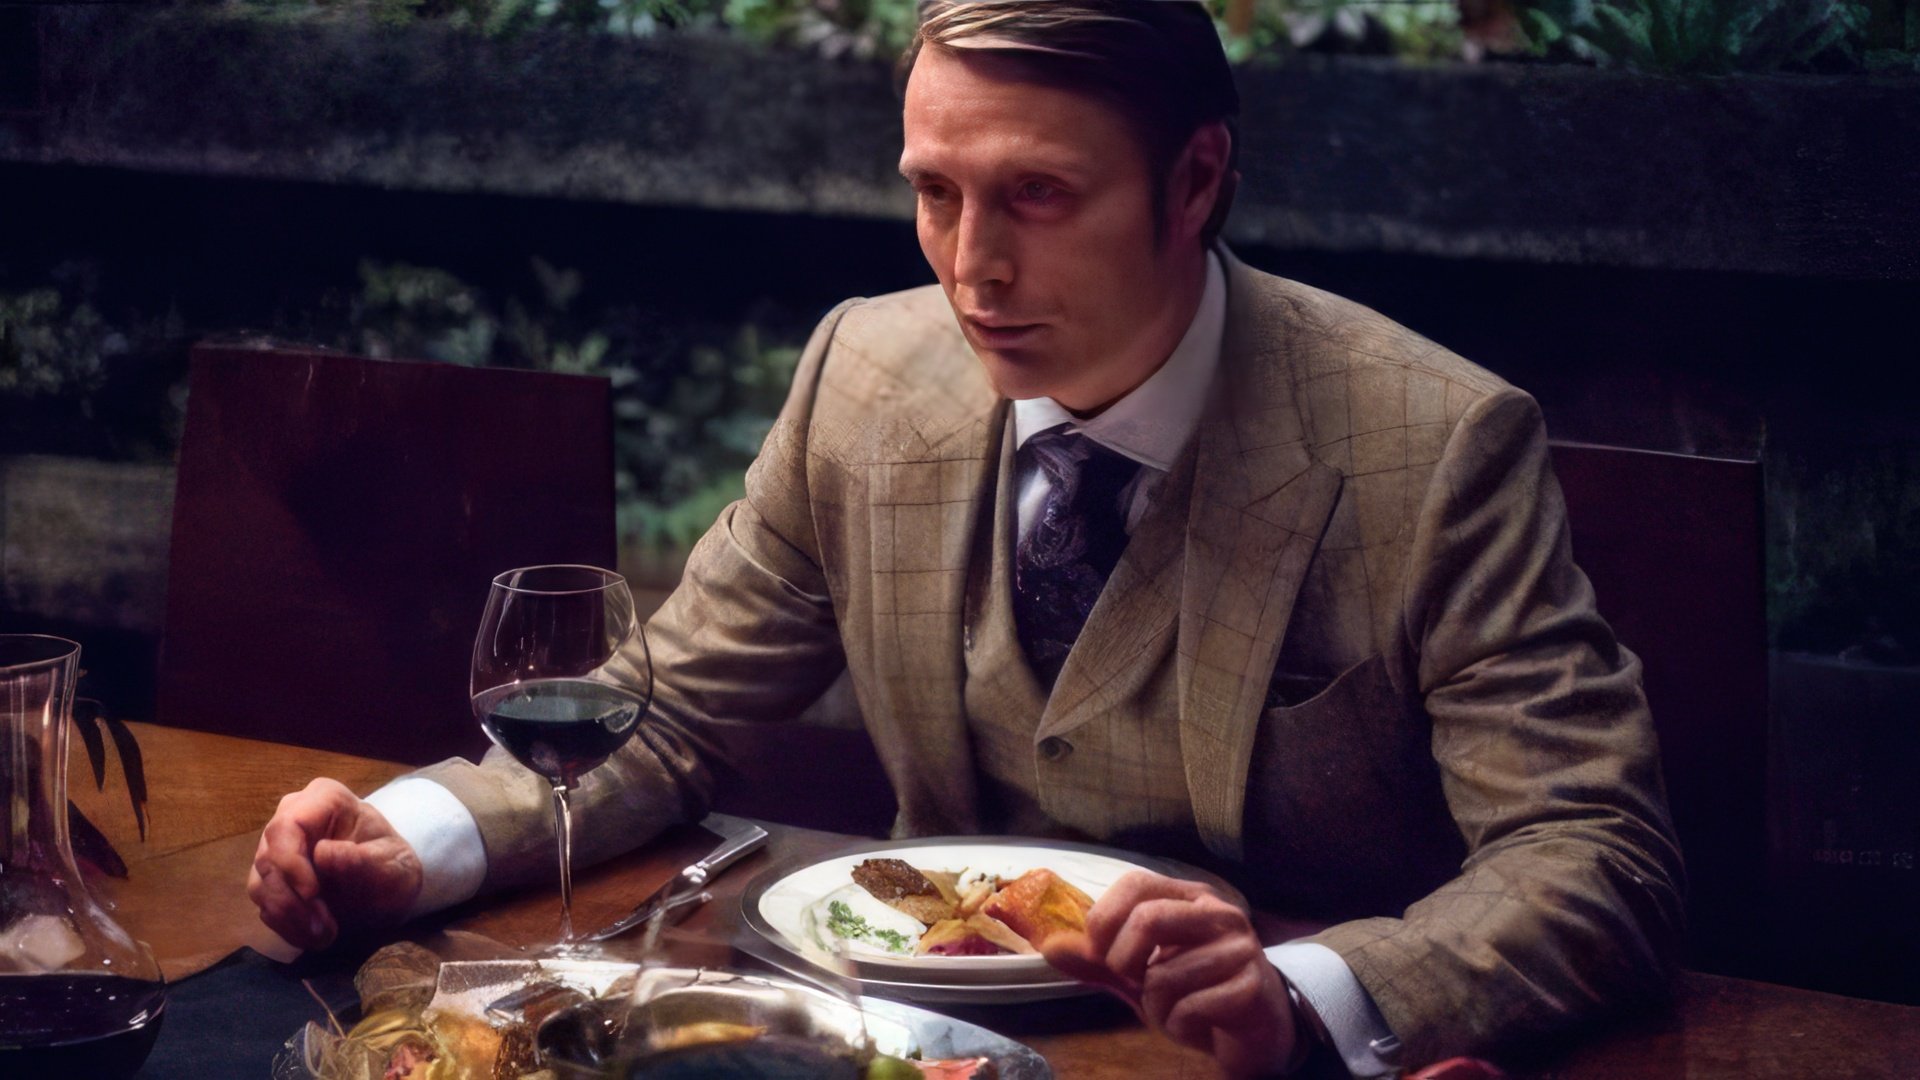 A Role of Hannibal Lecter Made Mads Mikkelsen a World Famous Actor